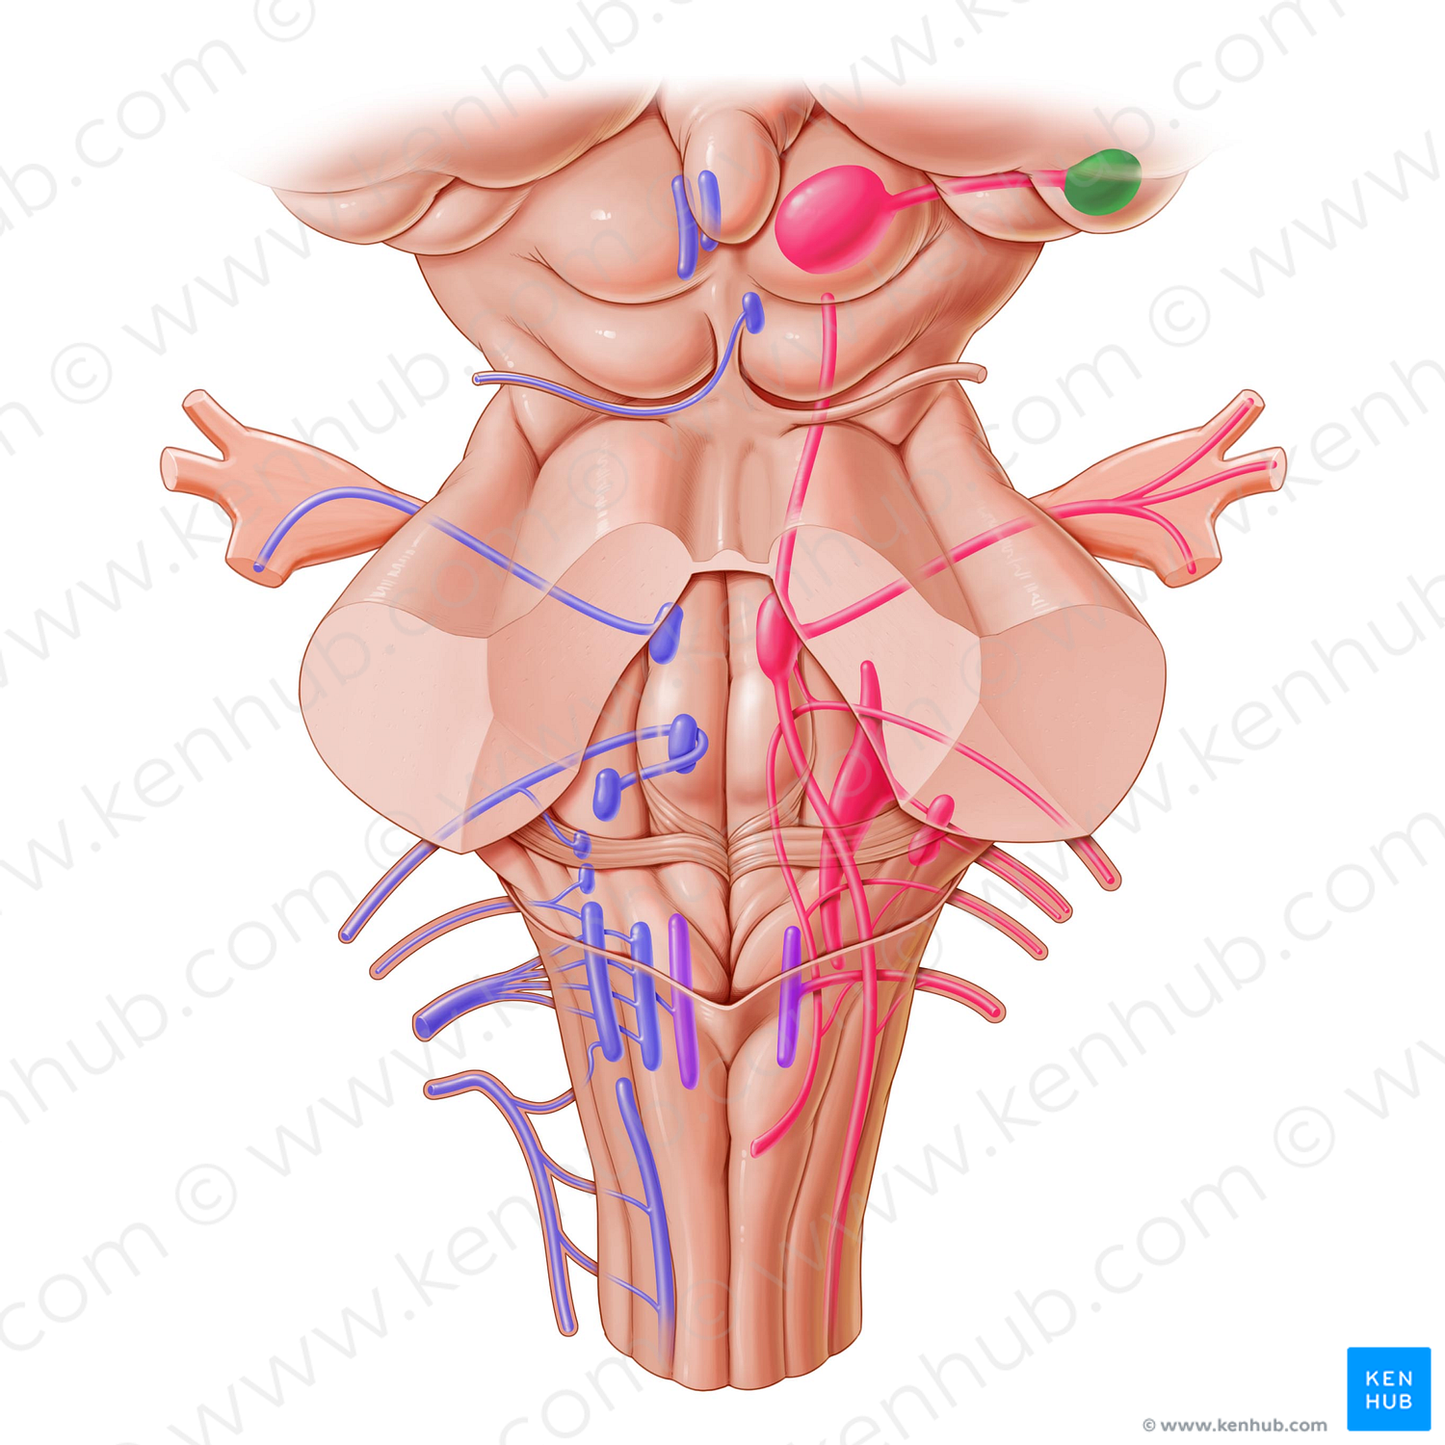 Lateral geniculate body (#2933)